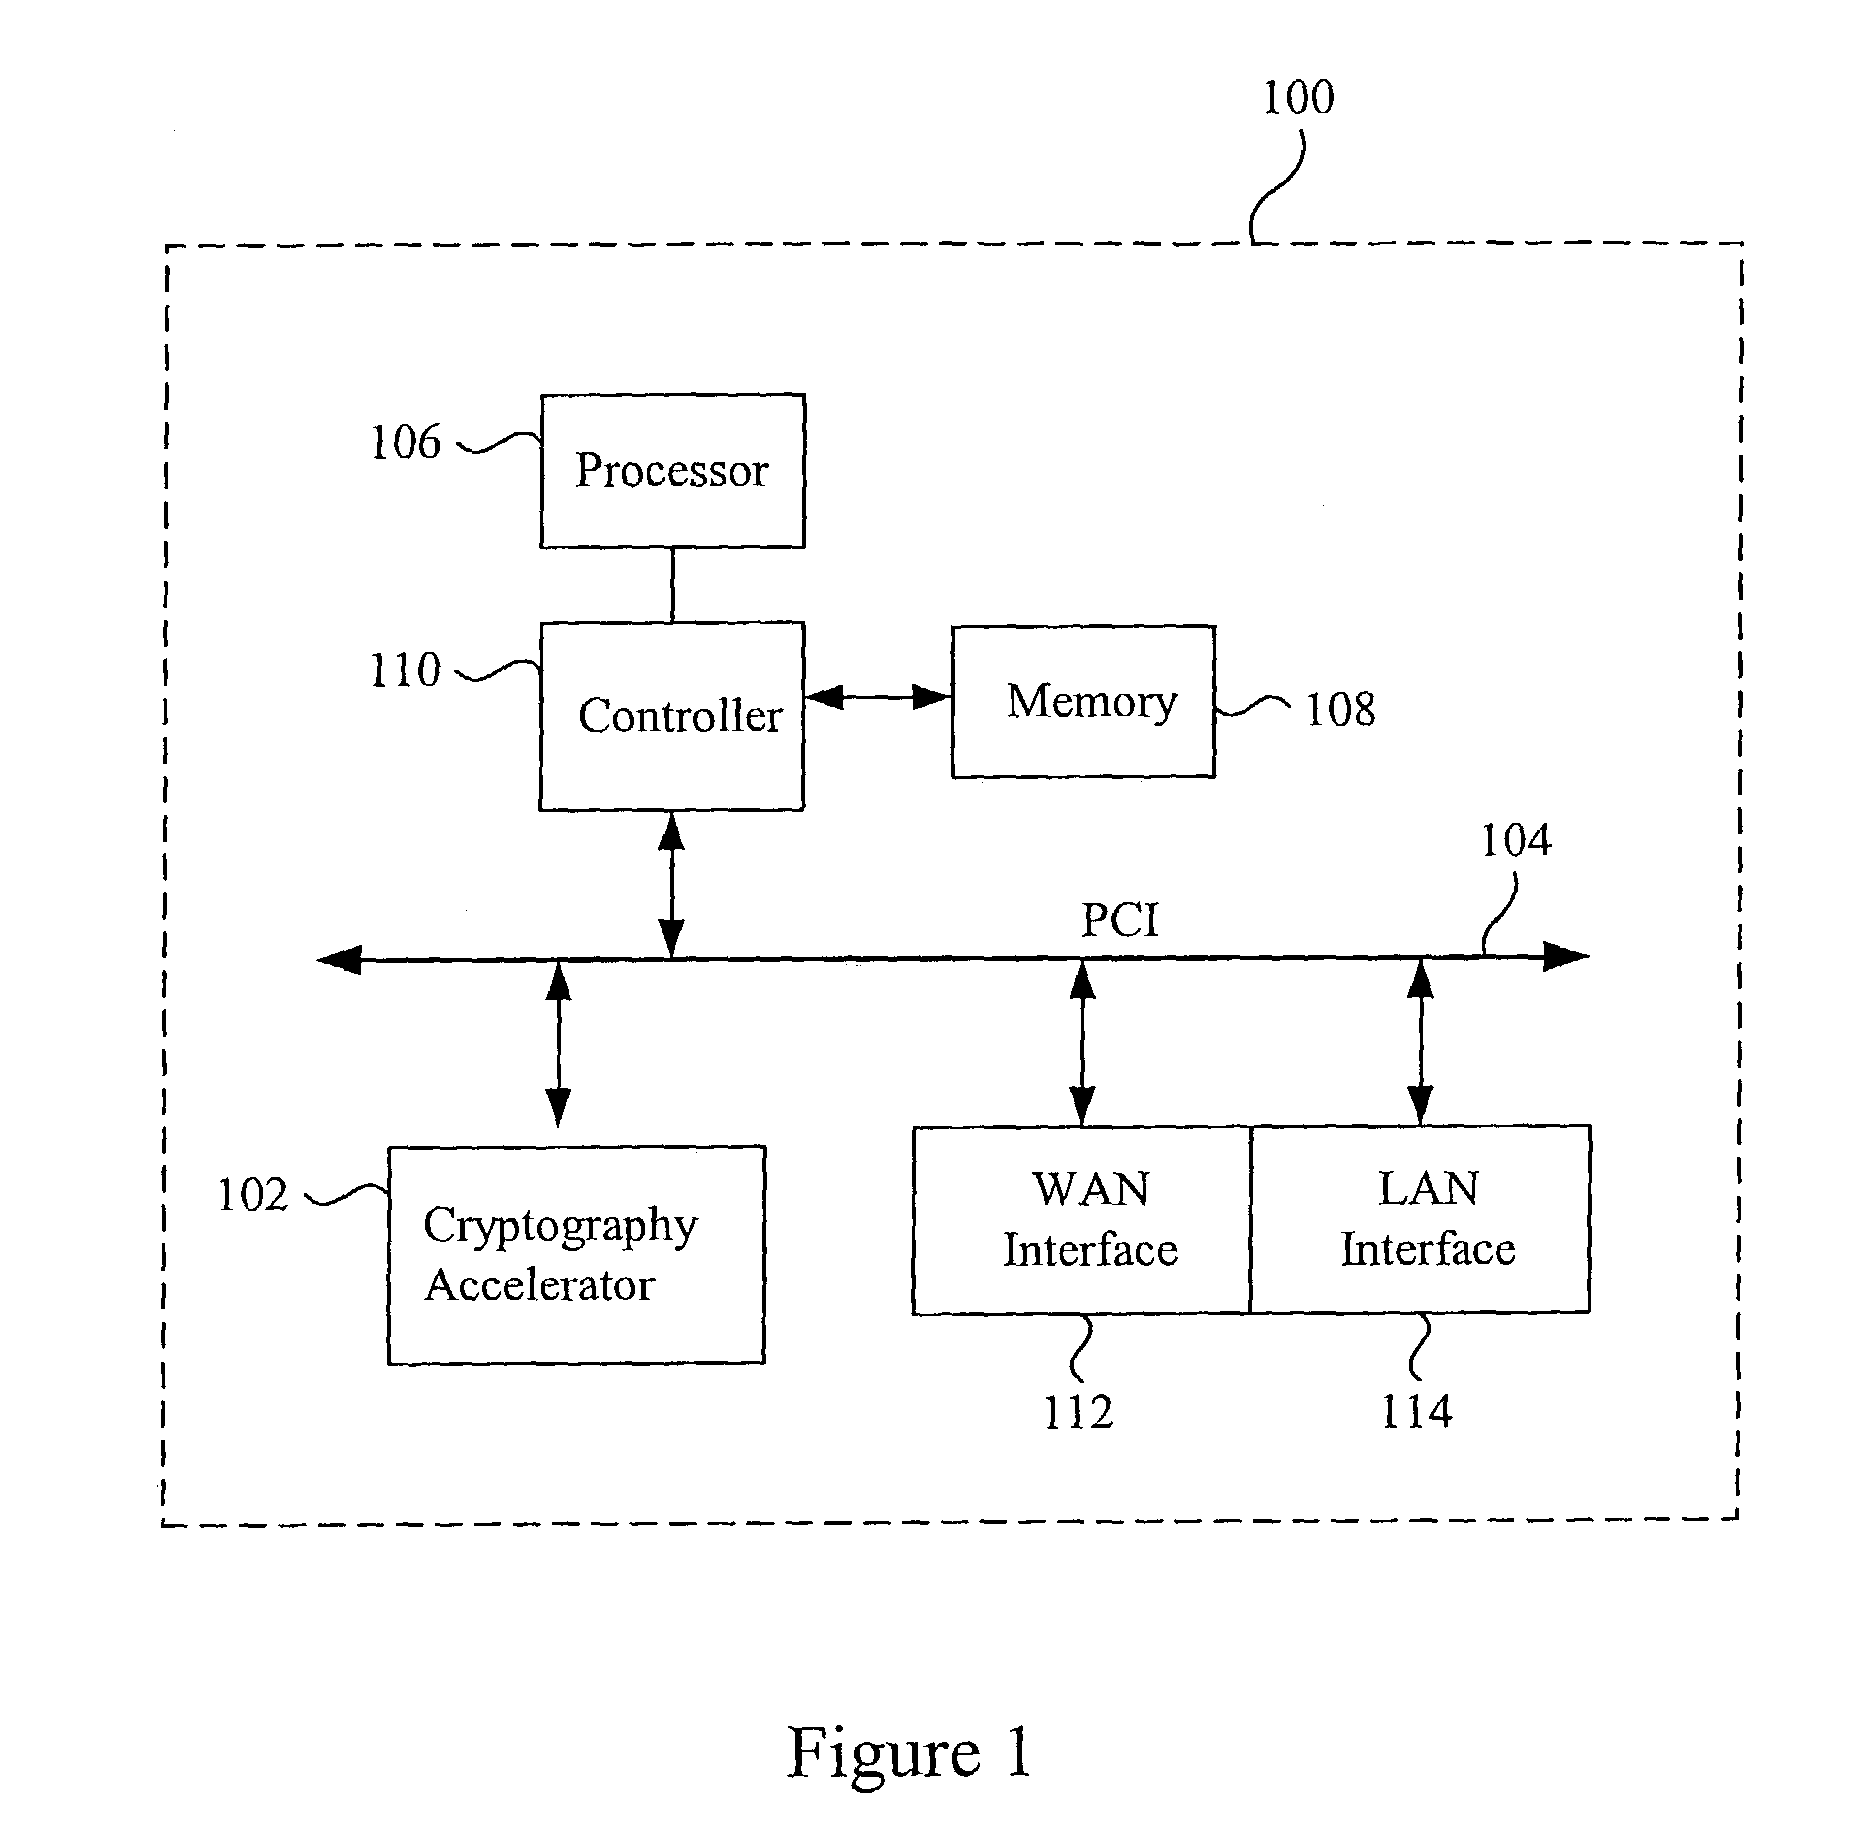 Methods and apparatus for initialization vector processing